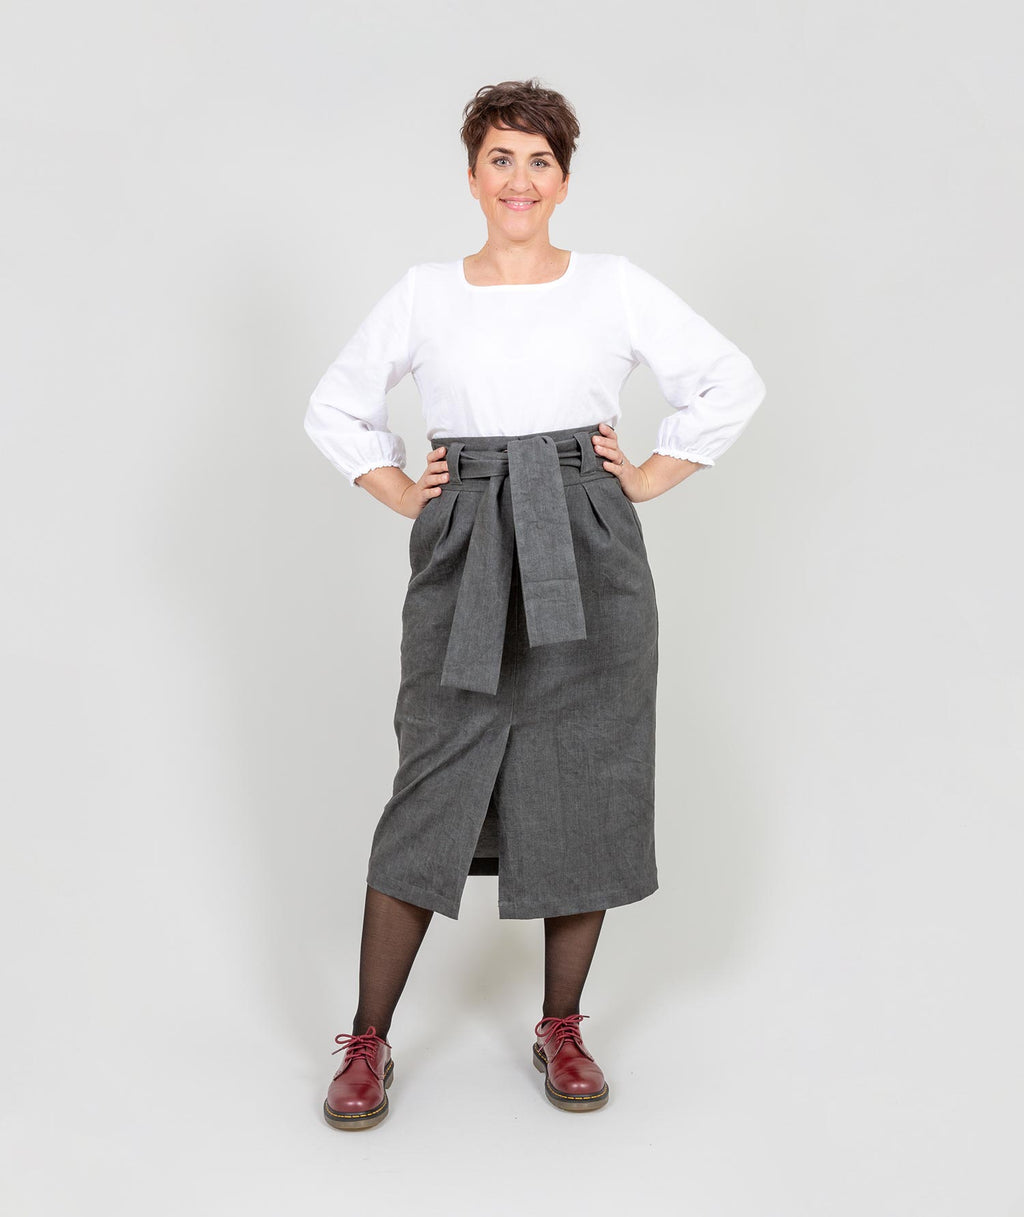 The "All Wrapped Up Skirt" - Grey